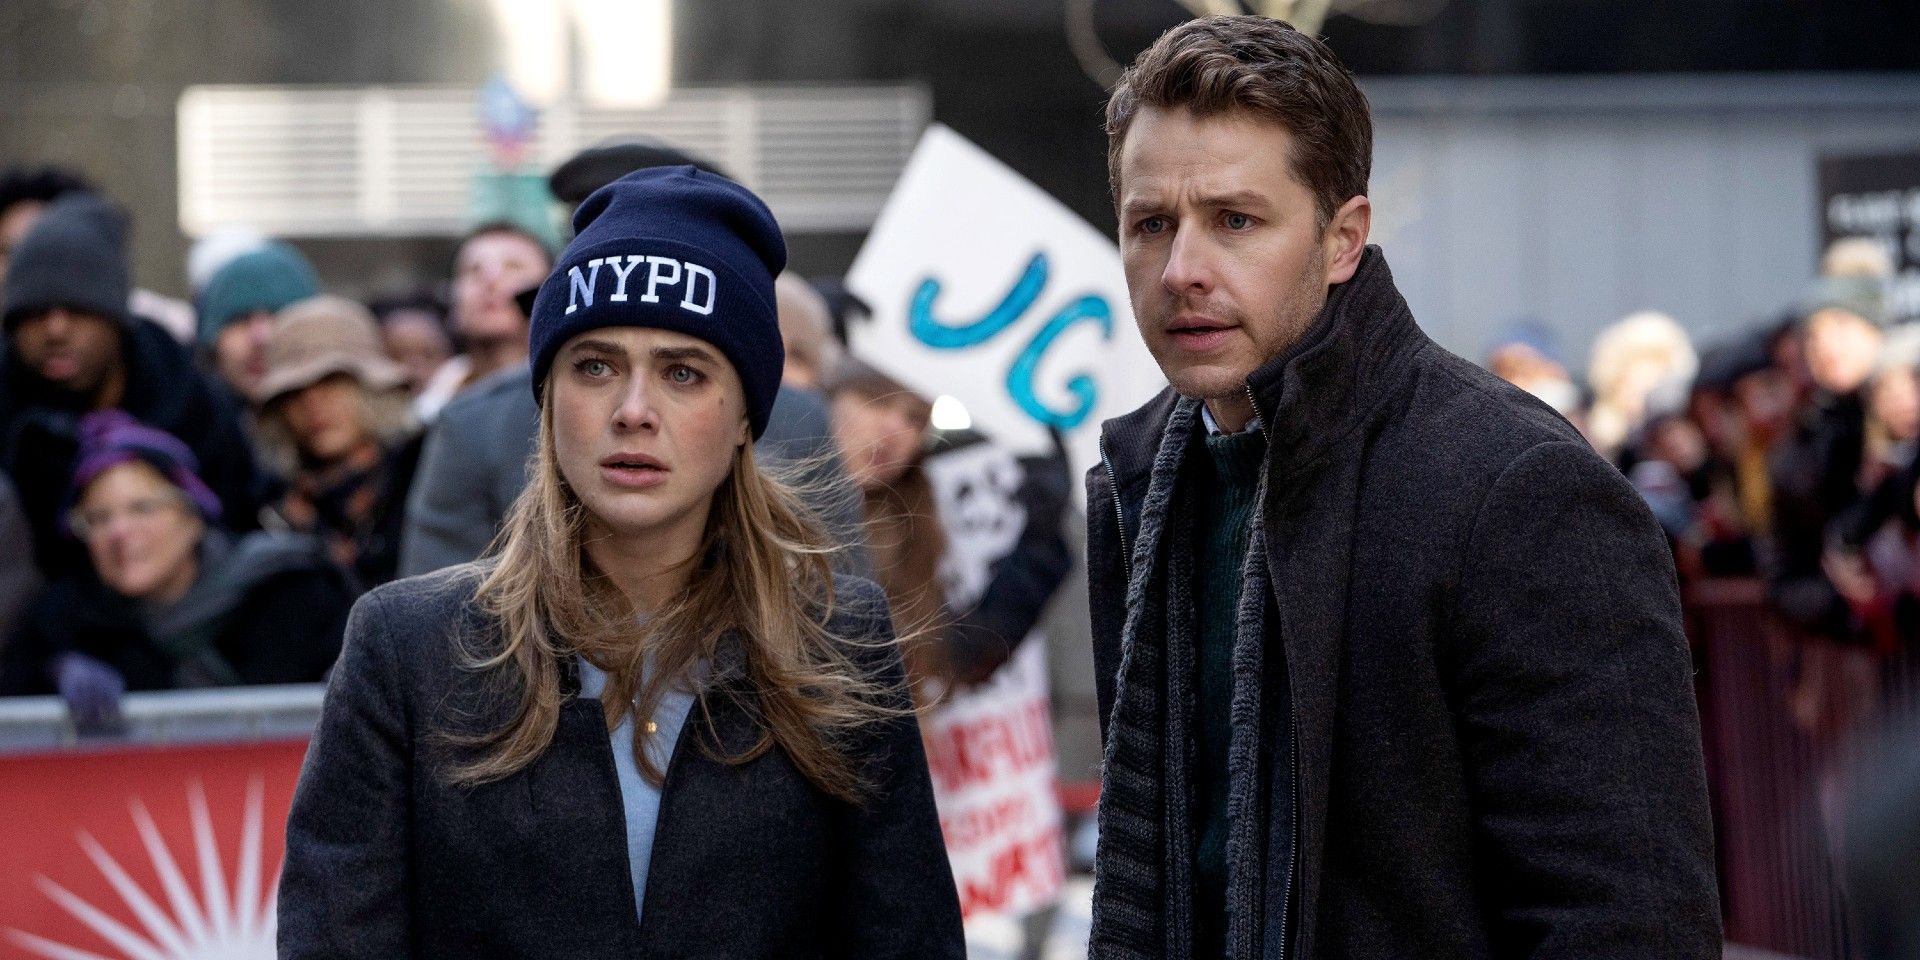 Scene from Manifest with two leads